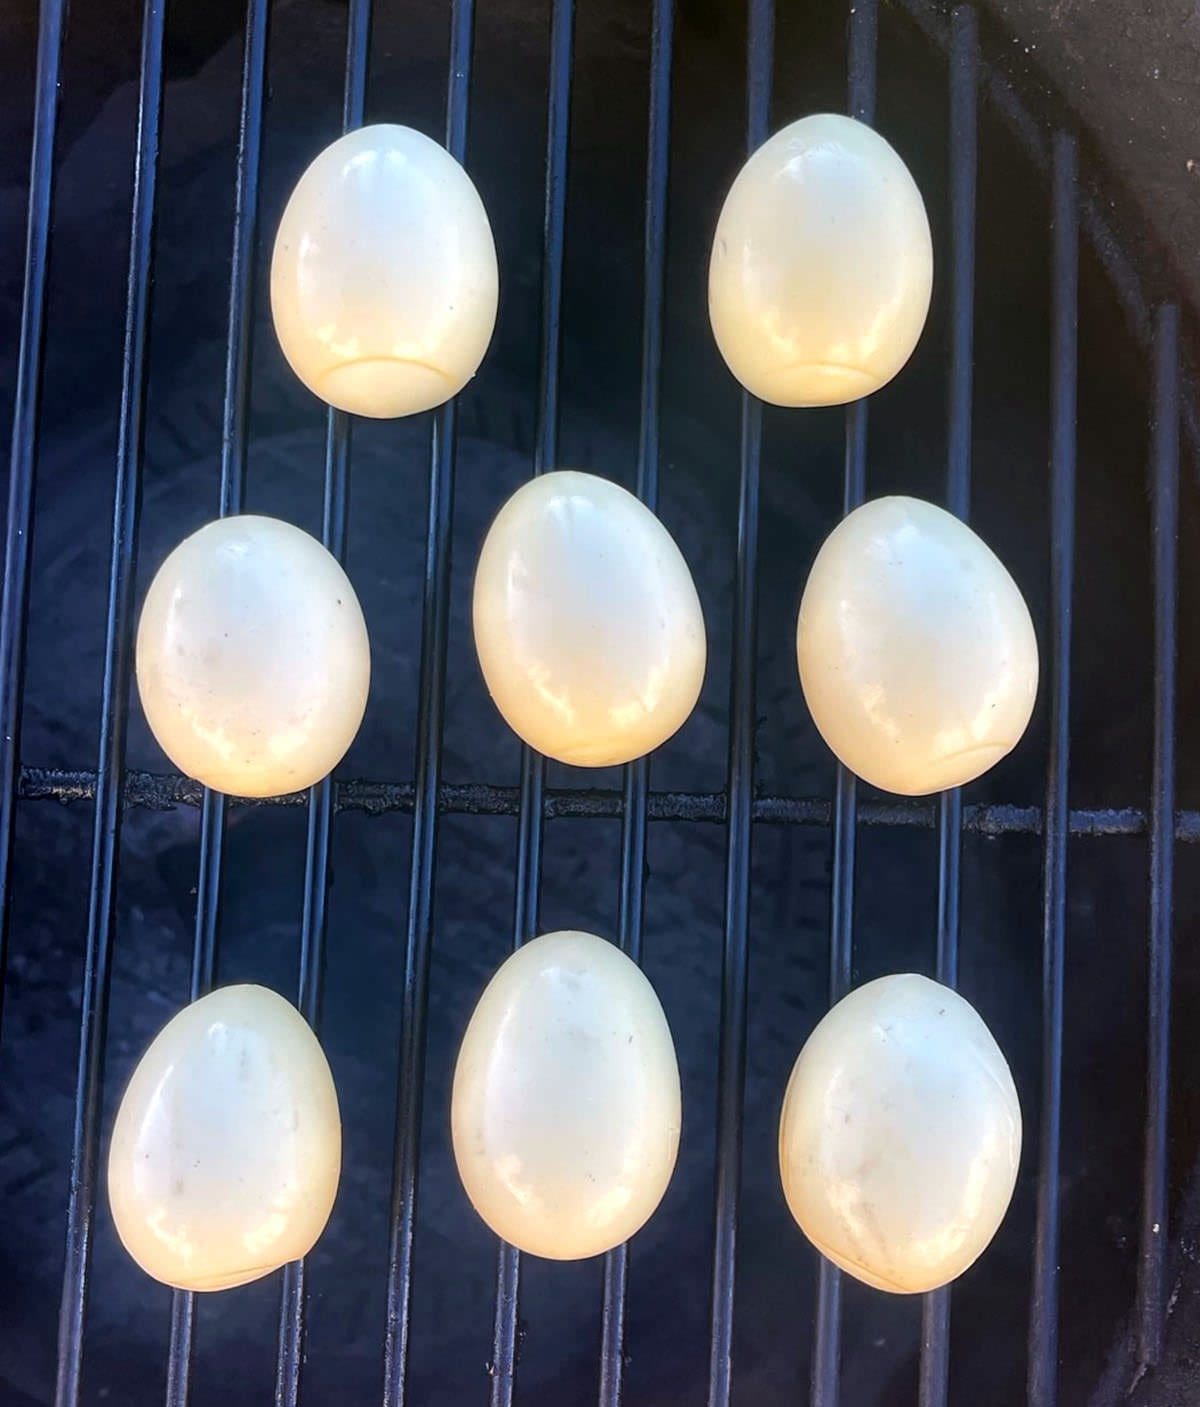 Cooked eggs on a grill.